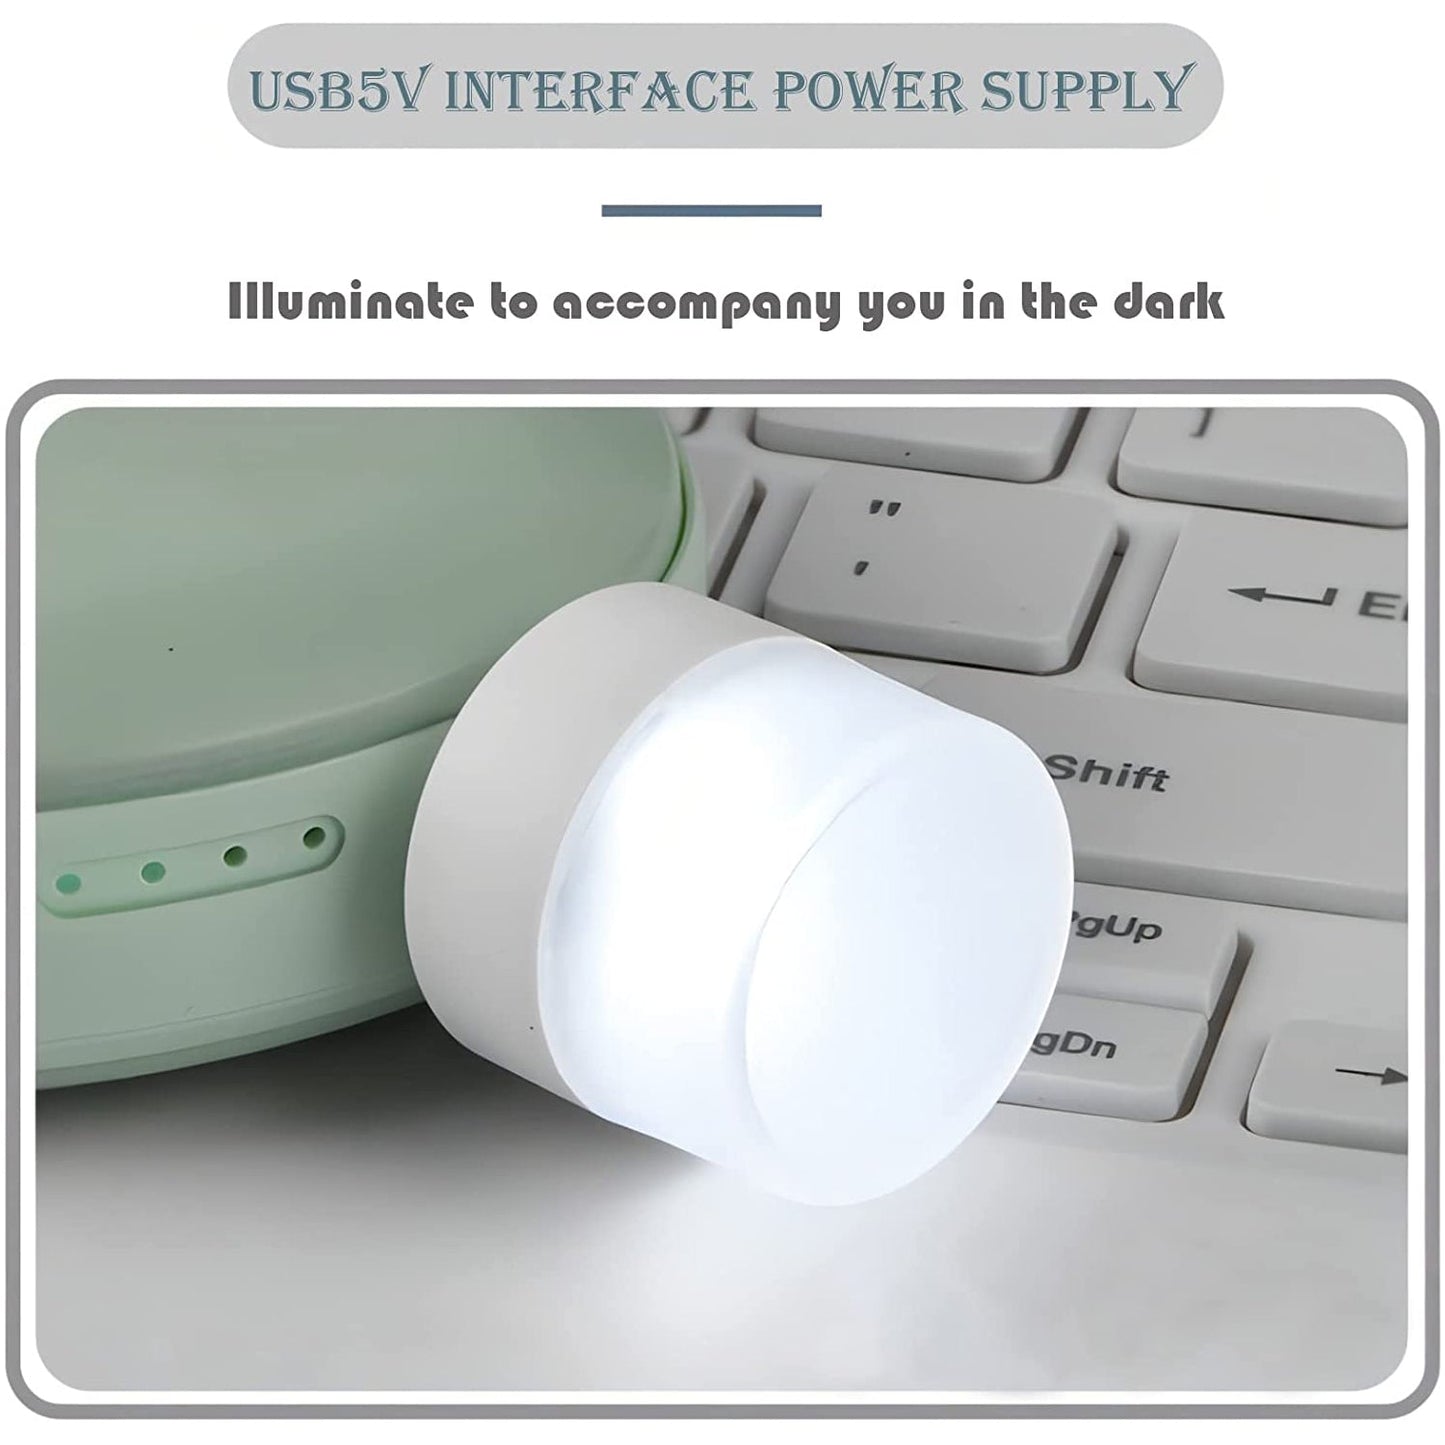 6096 Small USB Bulb used in all kinds of household and official places for room lighting purposes.